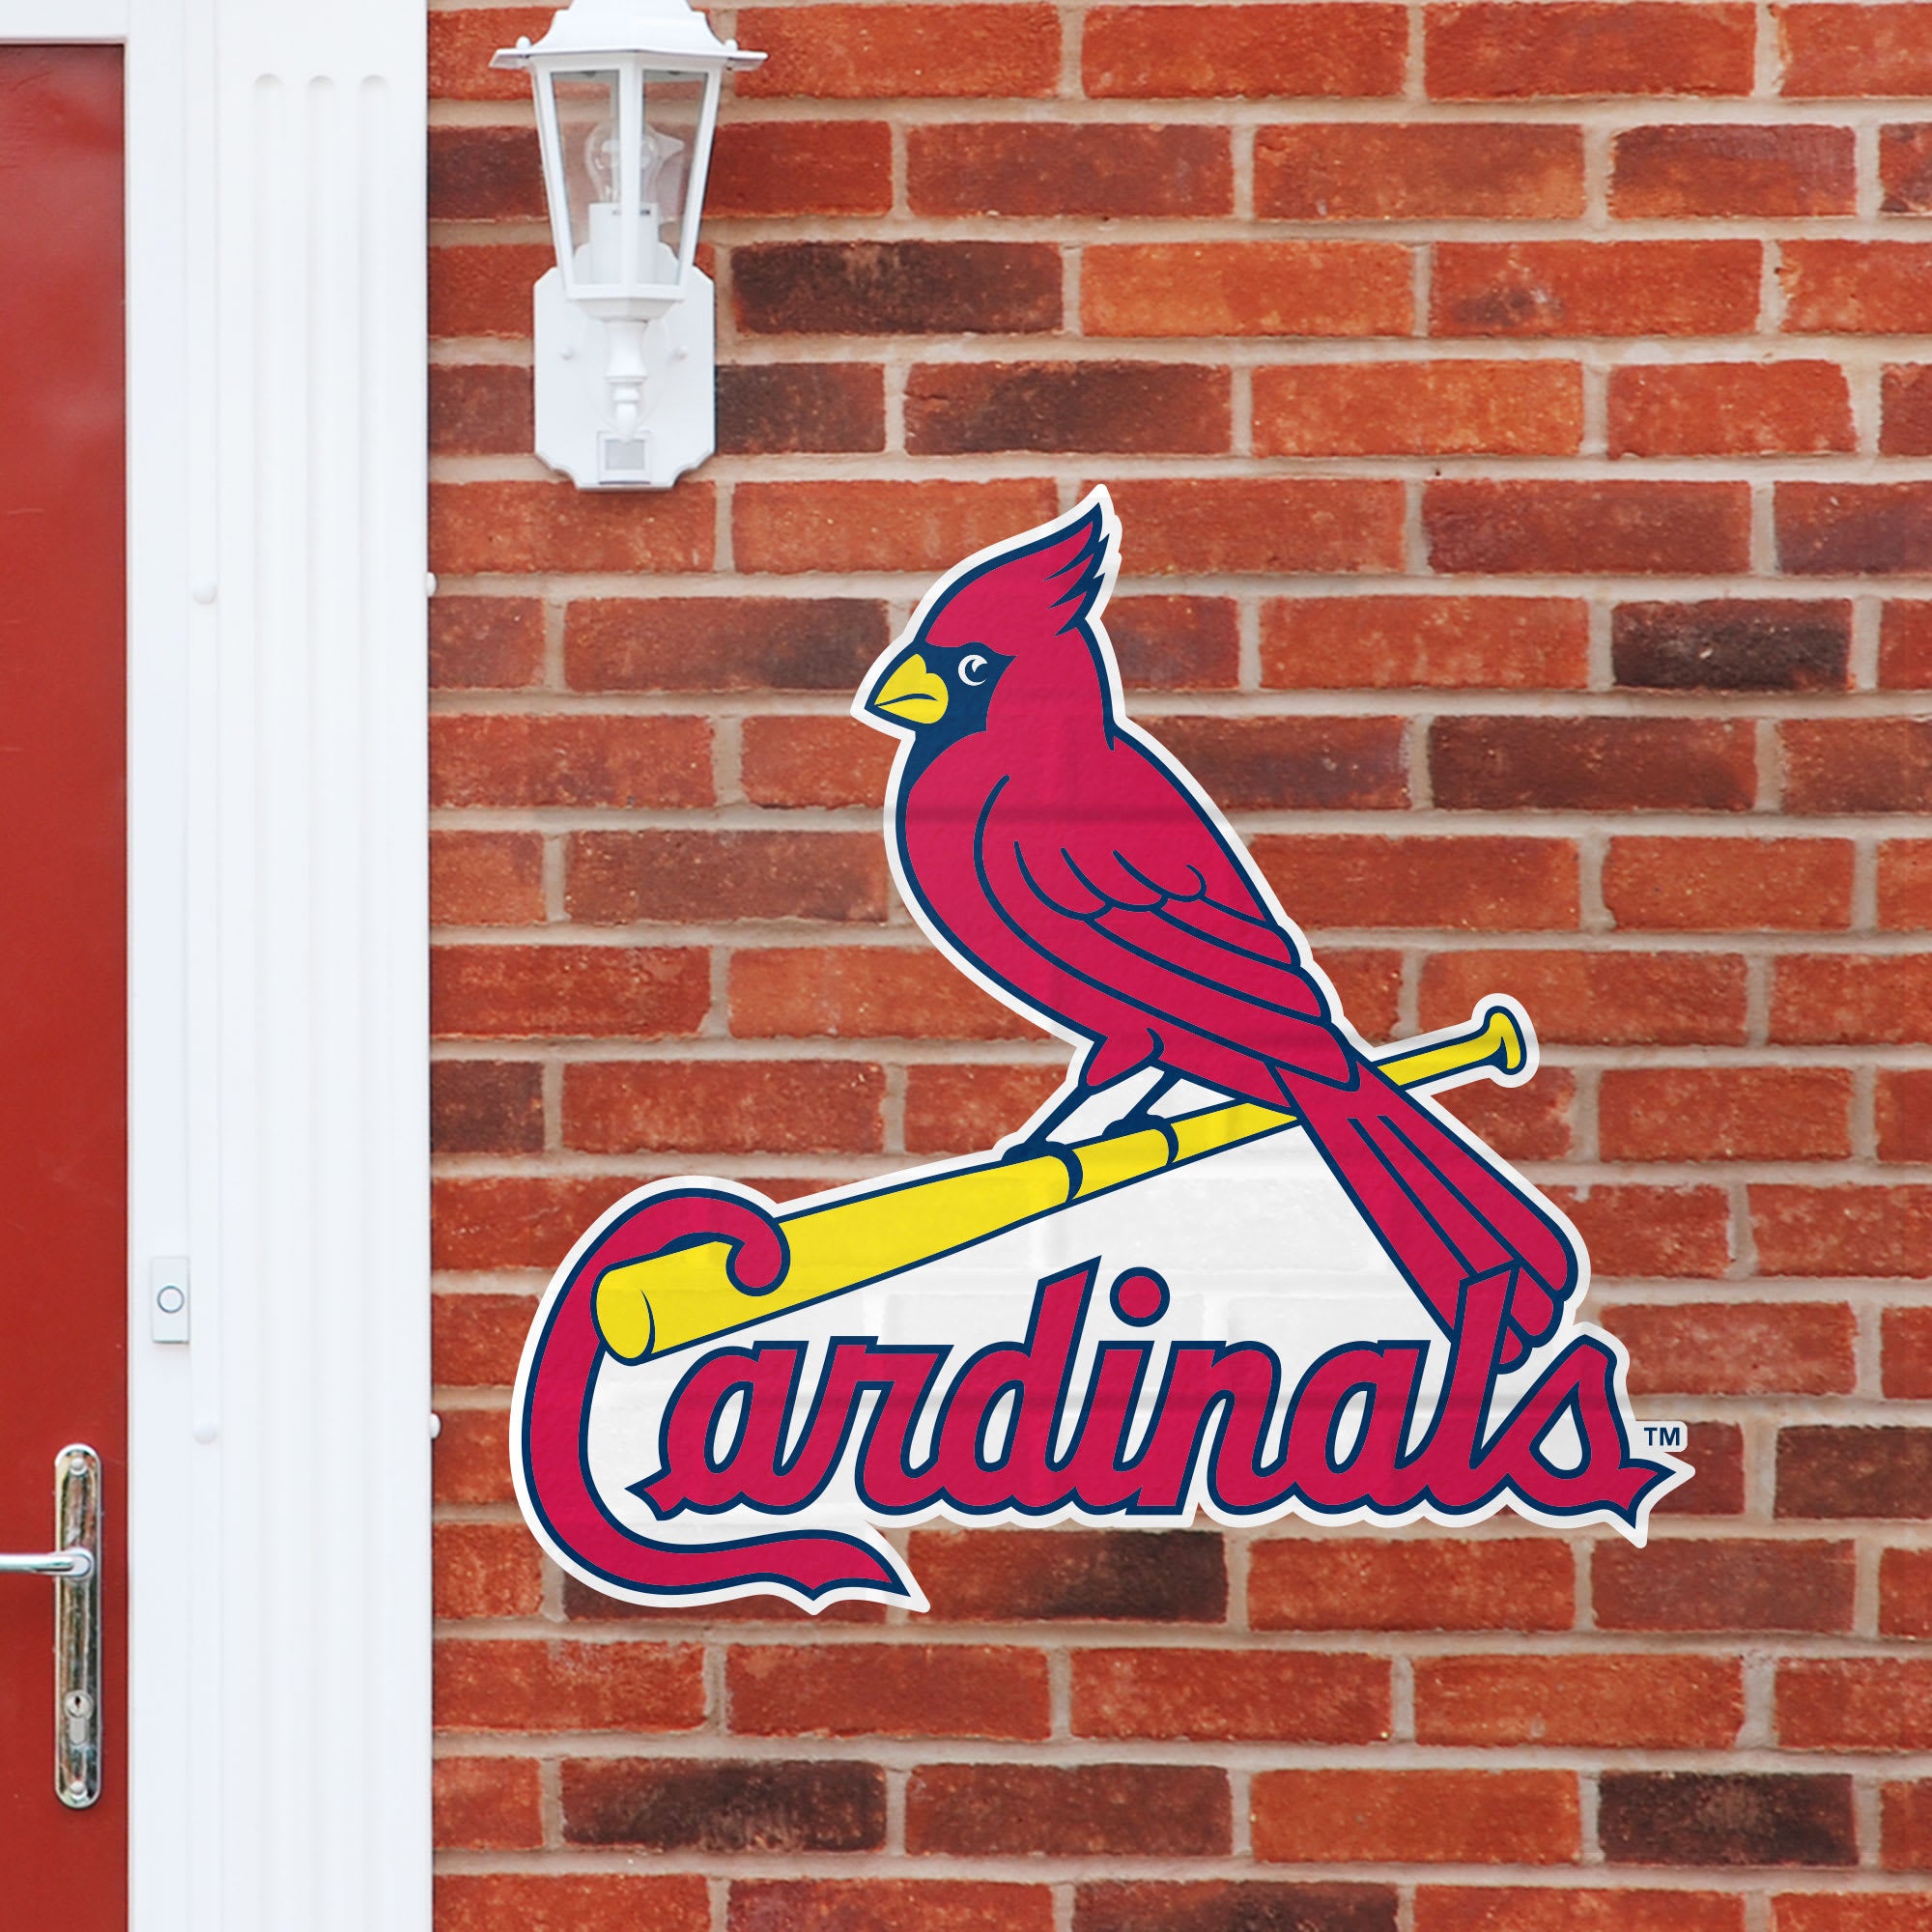 St. Louis Cardinals: Logo - Officially Licensed MLB Outdoor Graphic Giant Logo (30"W x 30"H) by Fathead | Wood/Aluminum